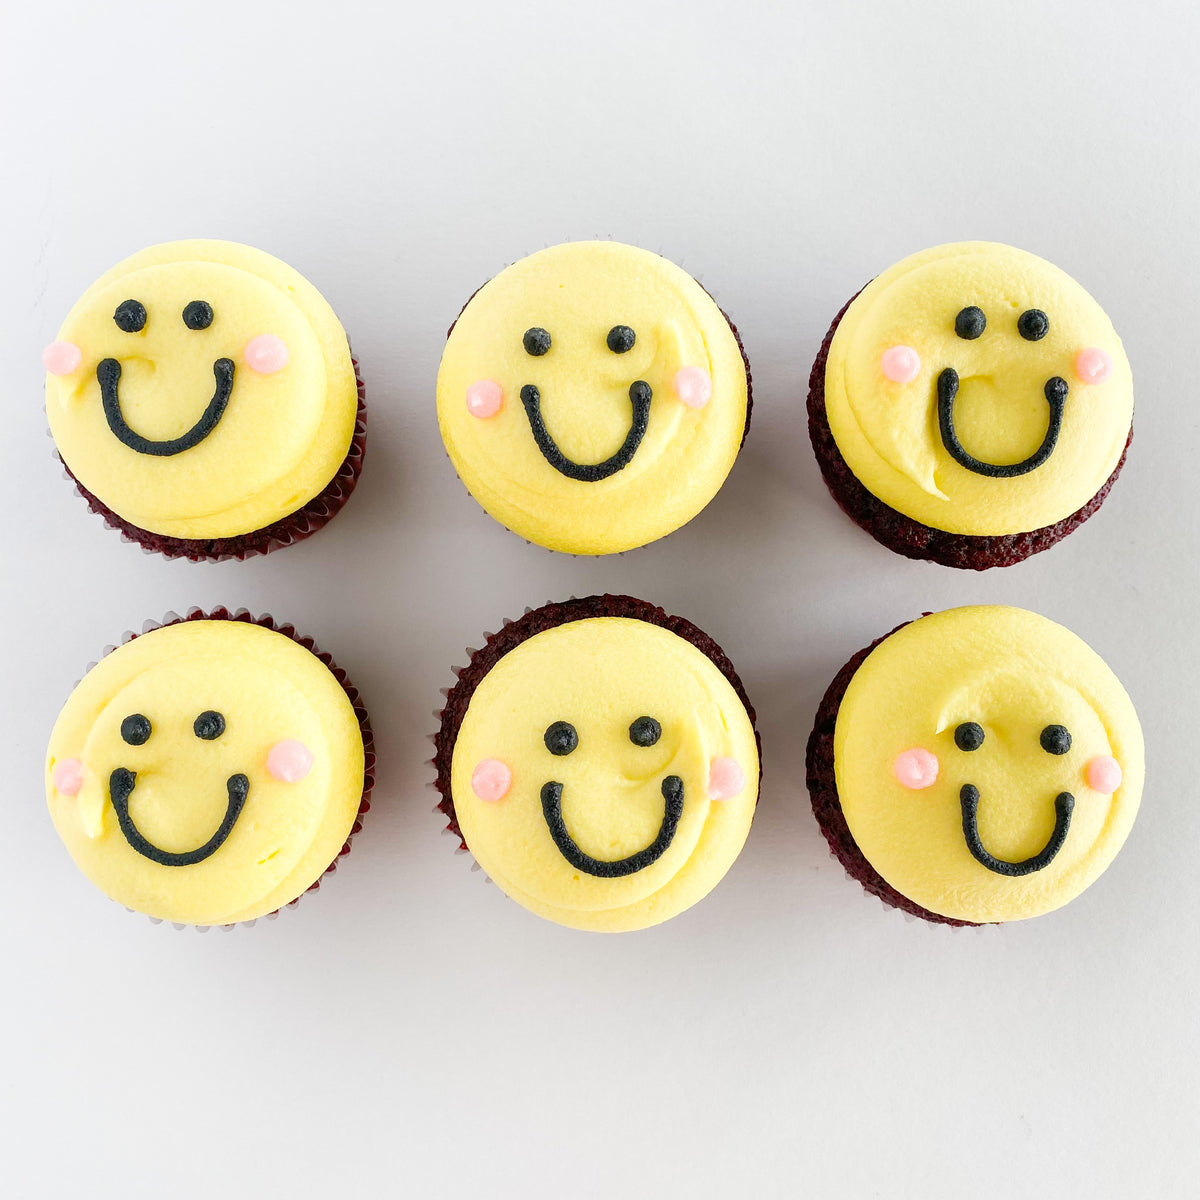 Smile & Be Kind Cupcakes